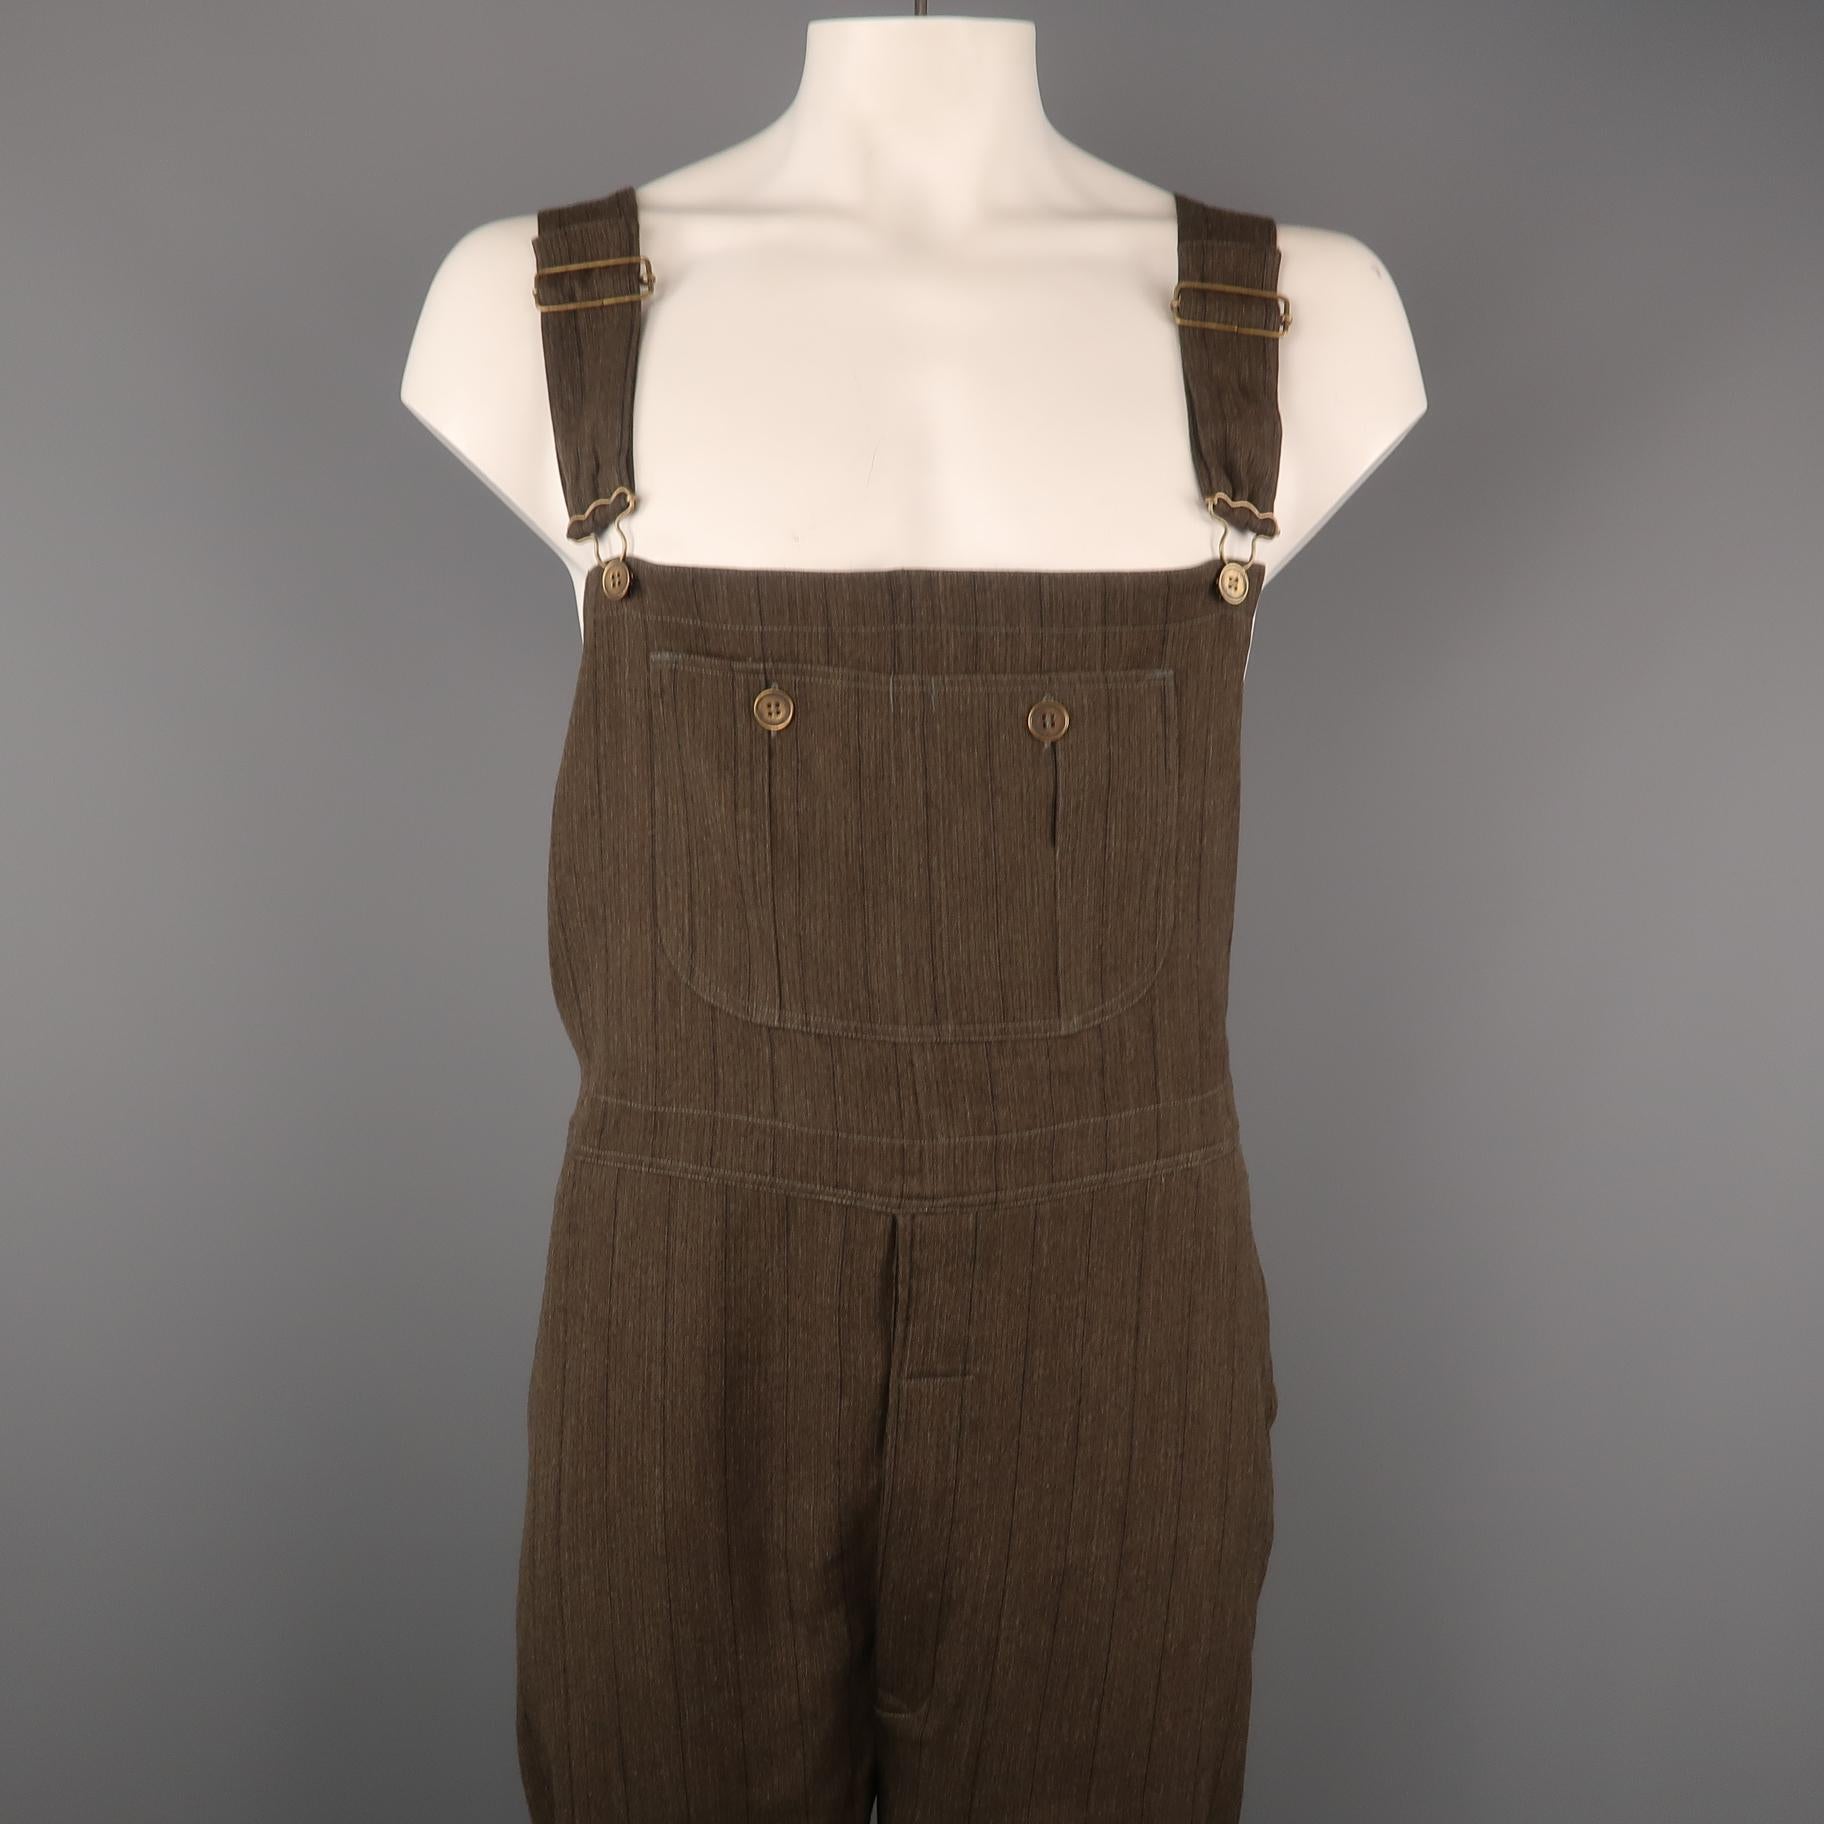 Vintage CALVIN KLEIN COLLECTION relaxed fit overalls come in olive striped cotton with a pouch pocket, adjustable straps, and antique gold tone button hardware. Made in Italy.
 
Excellent Pre-Owned Condition.
Marked: L
 
Measurements:
 
Waist: 44